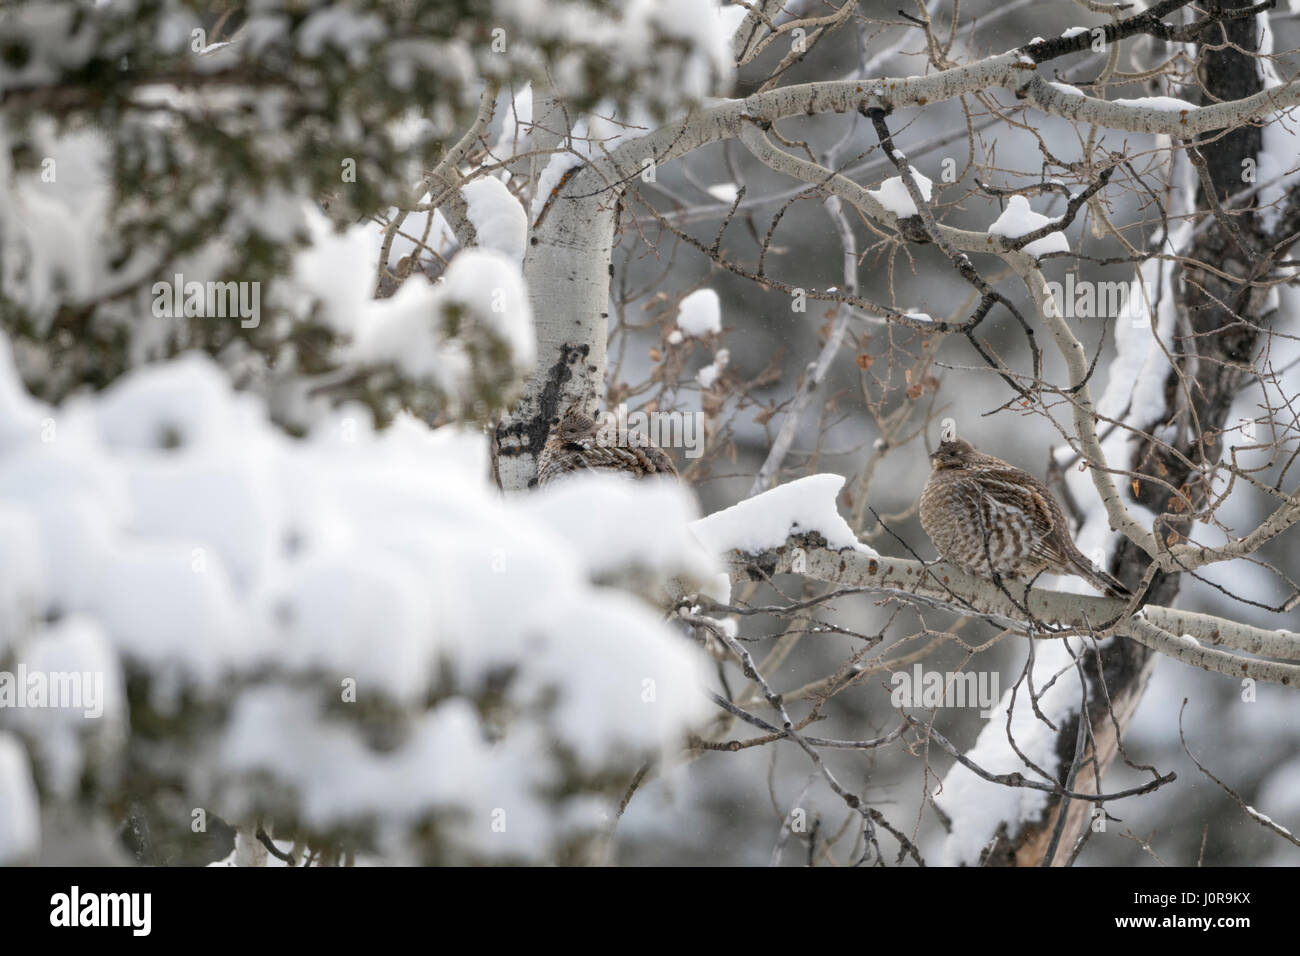 Ruffed grouse / Kragenhuehner ( Bonasa umbellus ), perched in a tree, perfect camouflage, in winter, snow, Yellowstone area, USA. Stock Photo